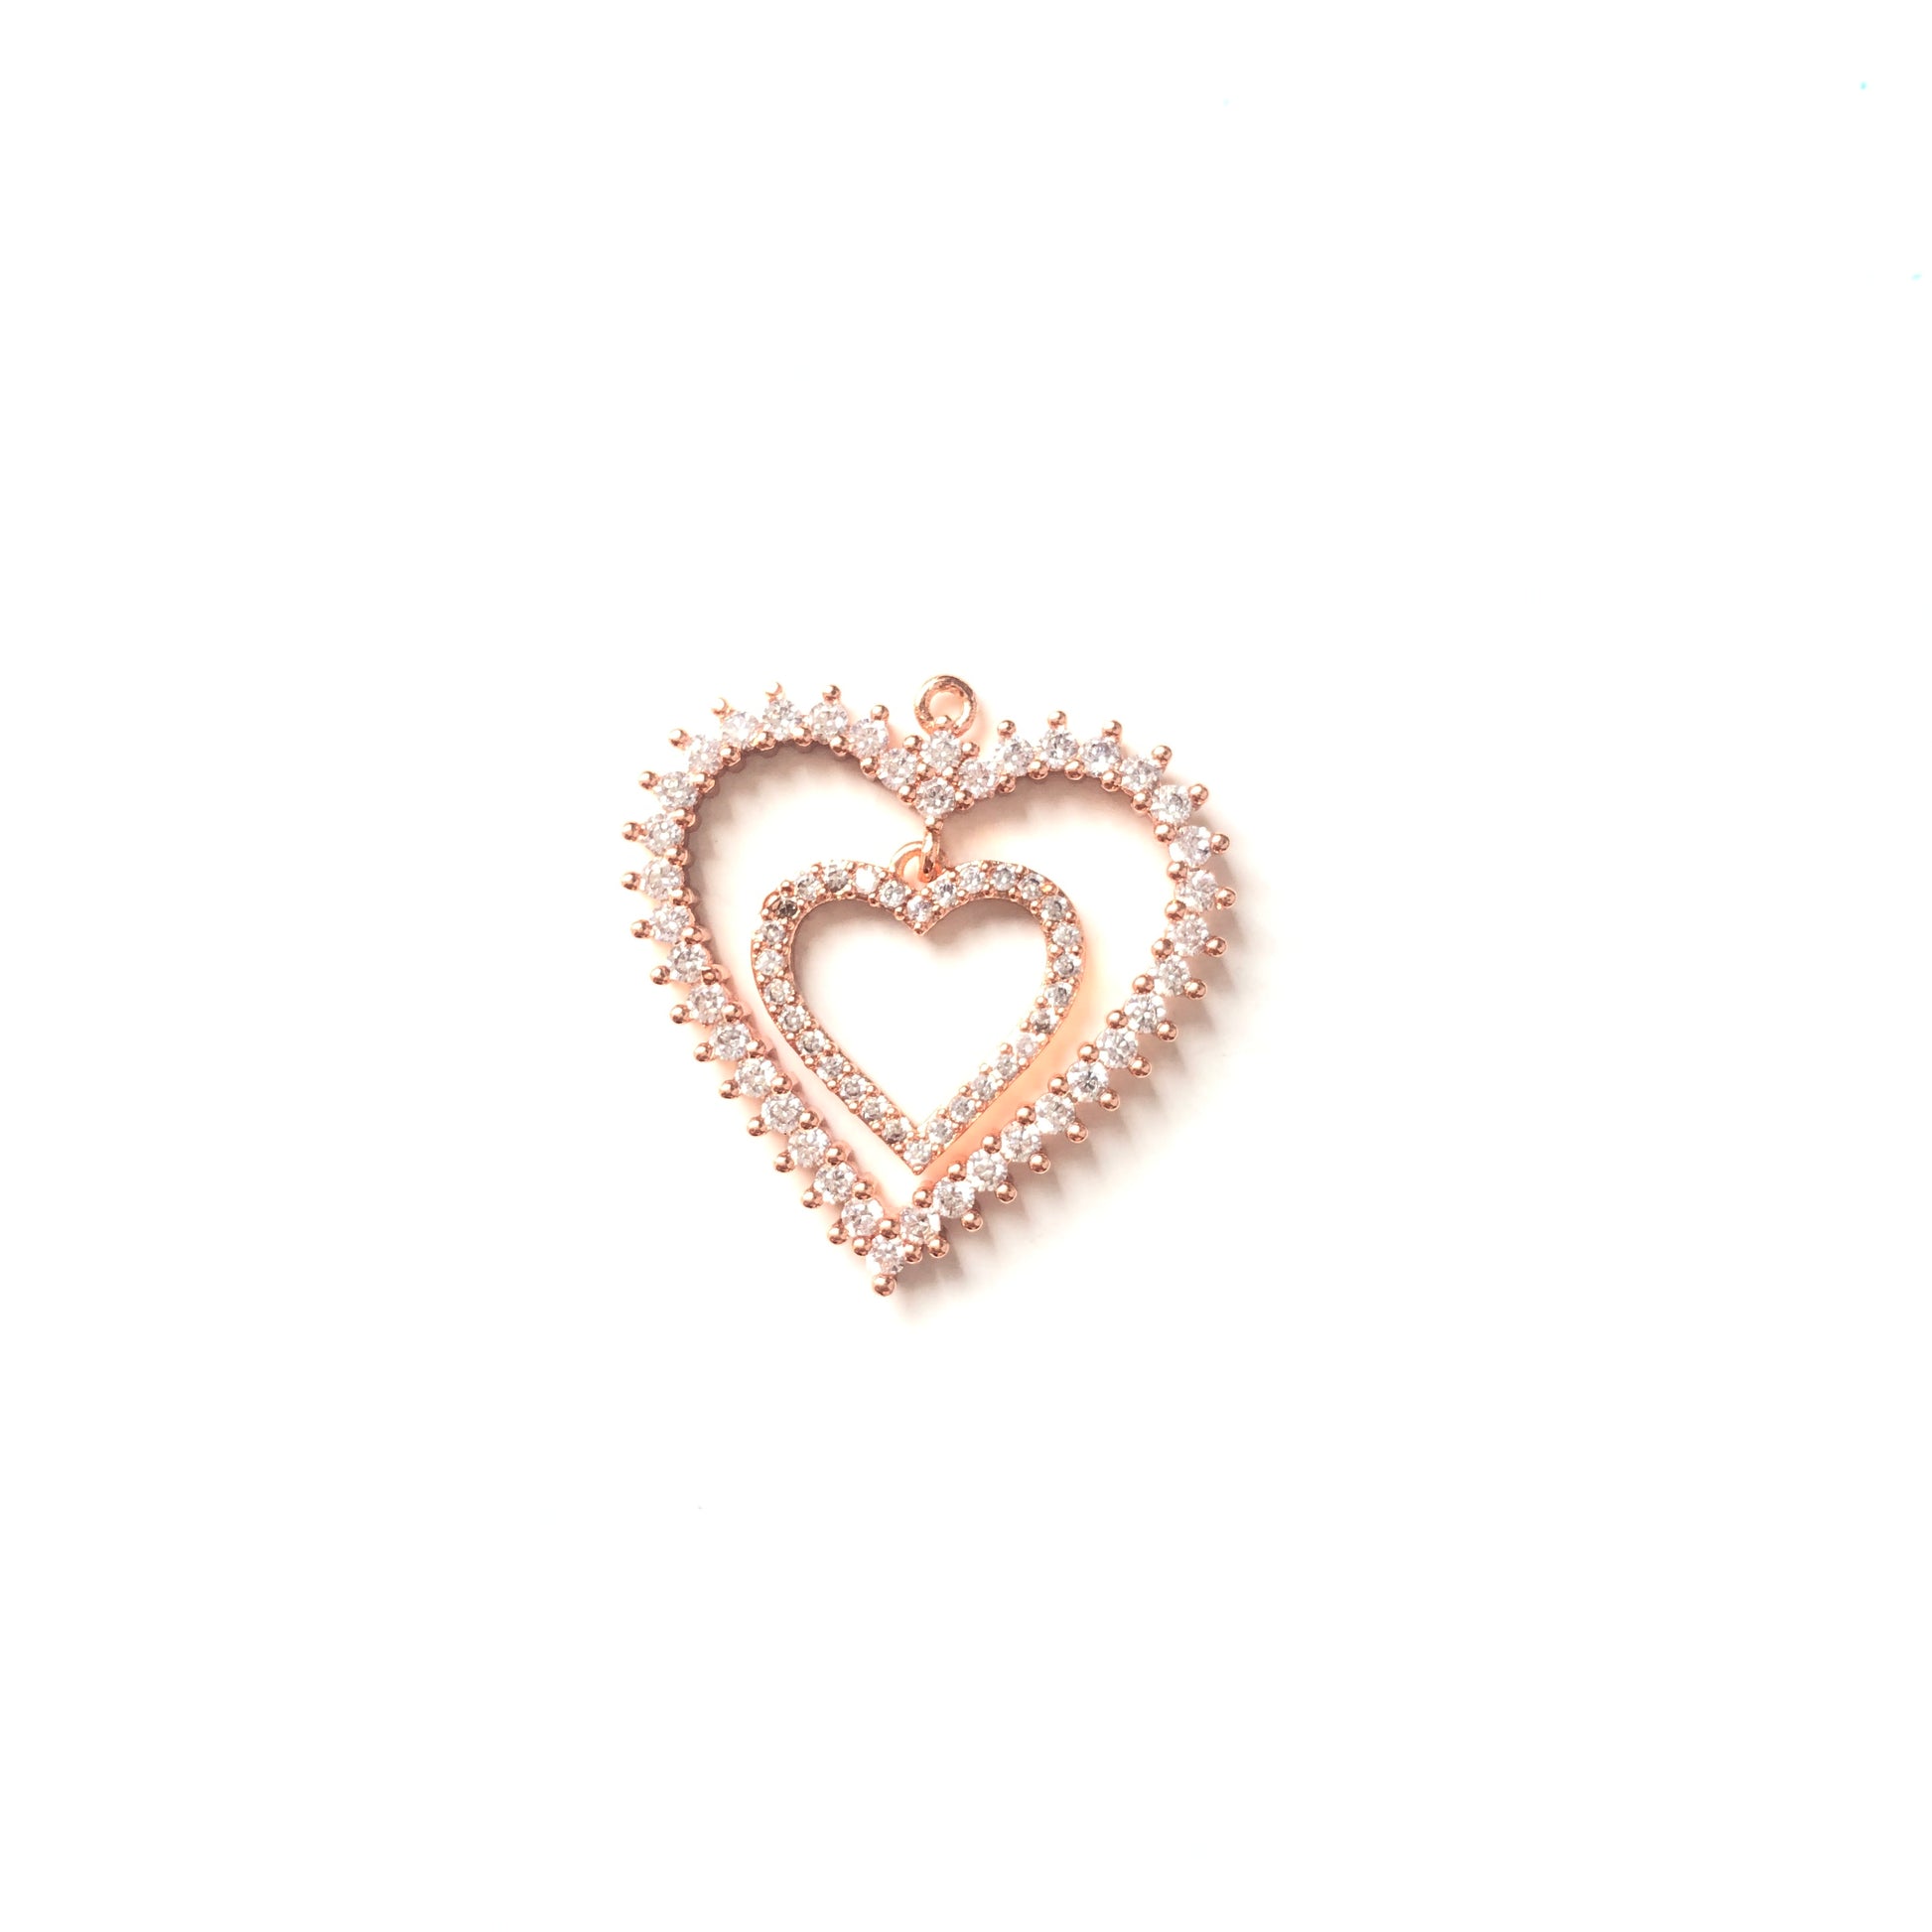 10pcs/lot 27*26.5mm CZ Paved Double Heart Charms Rose Gold CZ Paved Charms Hearts On Sale Charms Beads Beyond